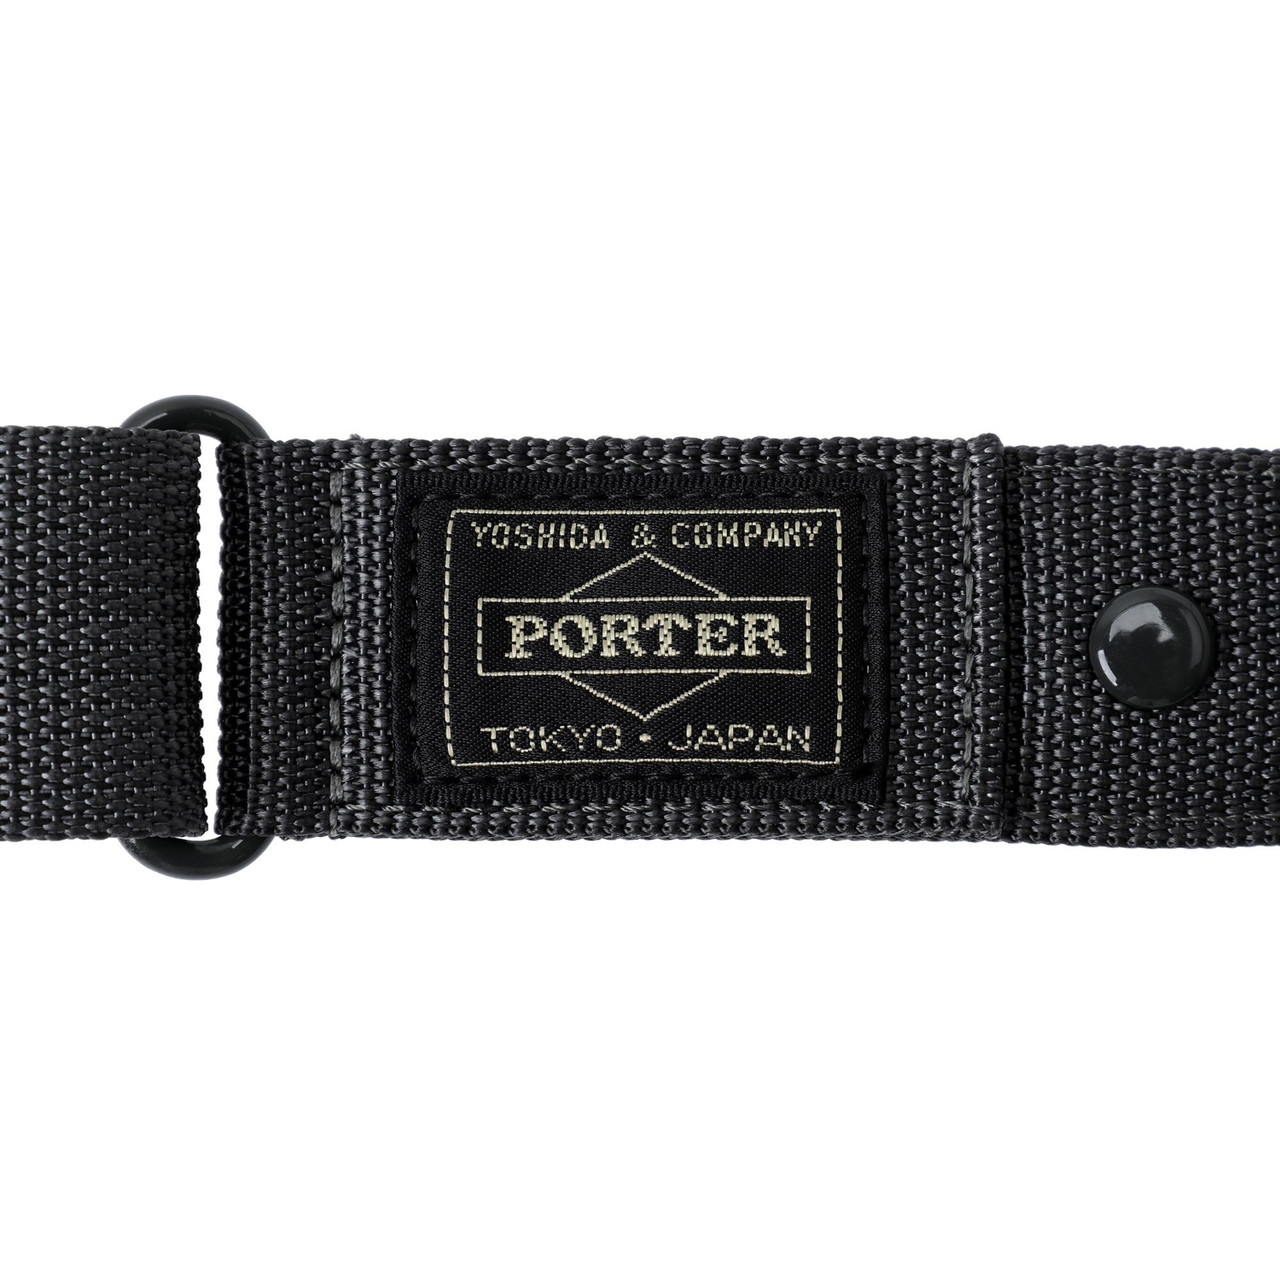 PX TANKER CARRYING EQUIPMENT STRAP 30 376-19808